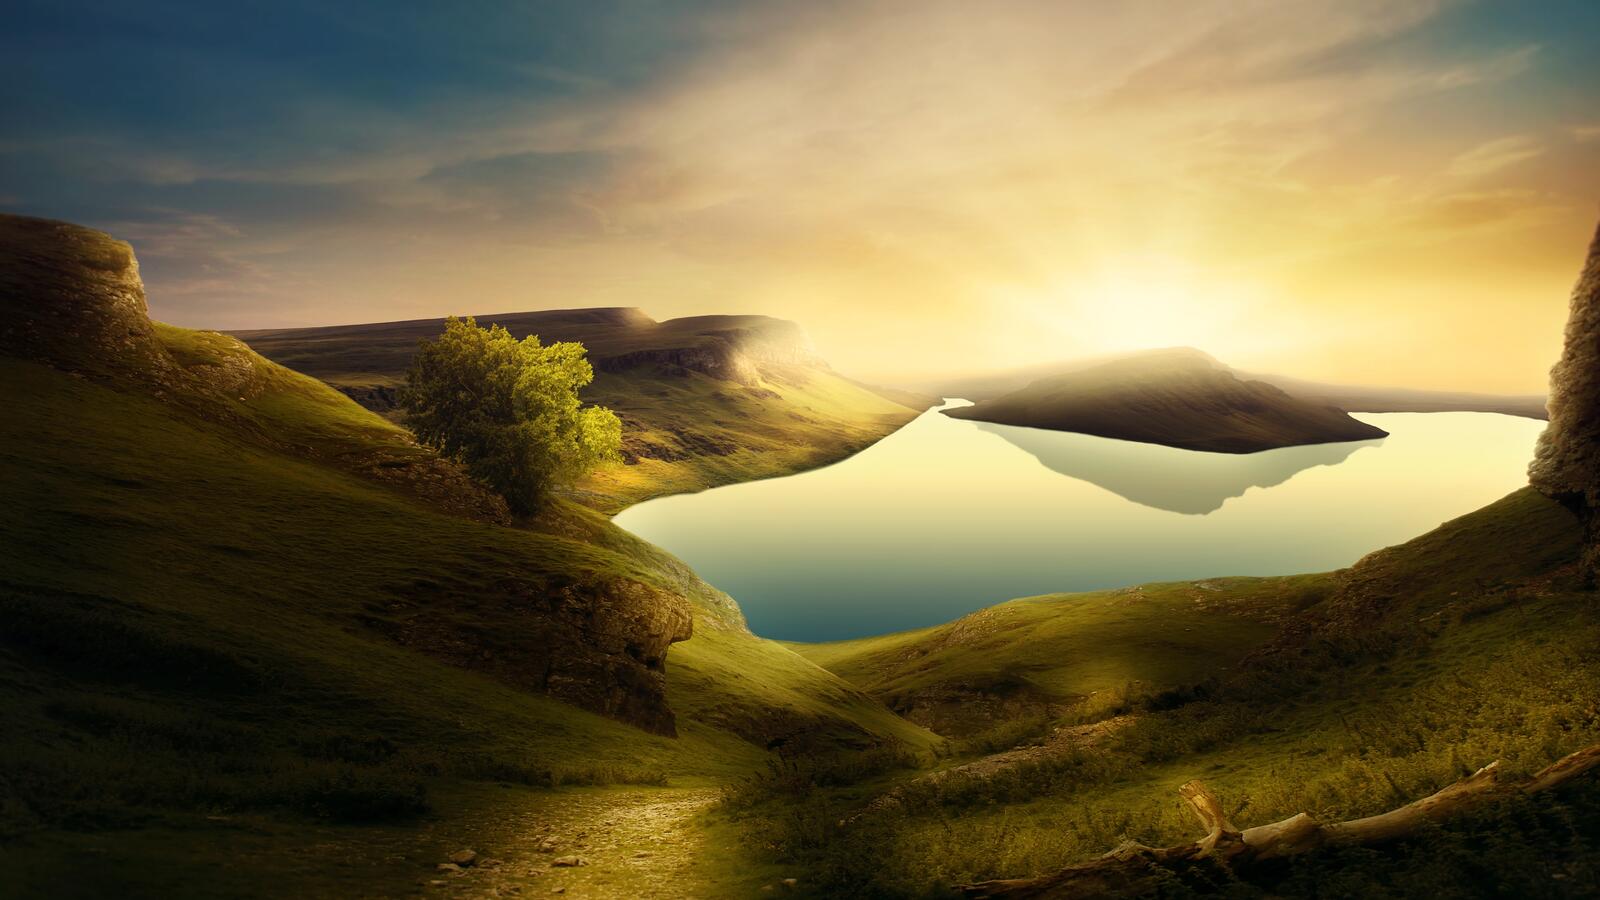 Wallpapers wallpaper lake picturesque mood on the desktop